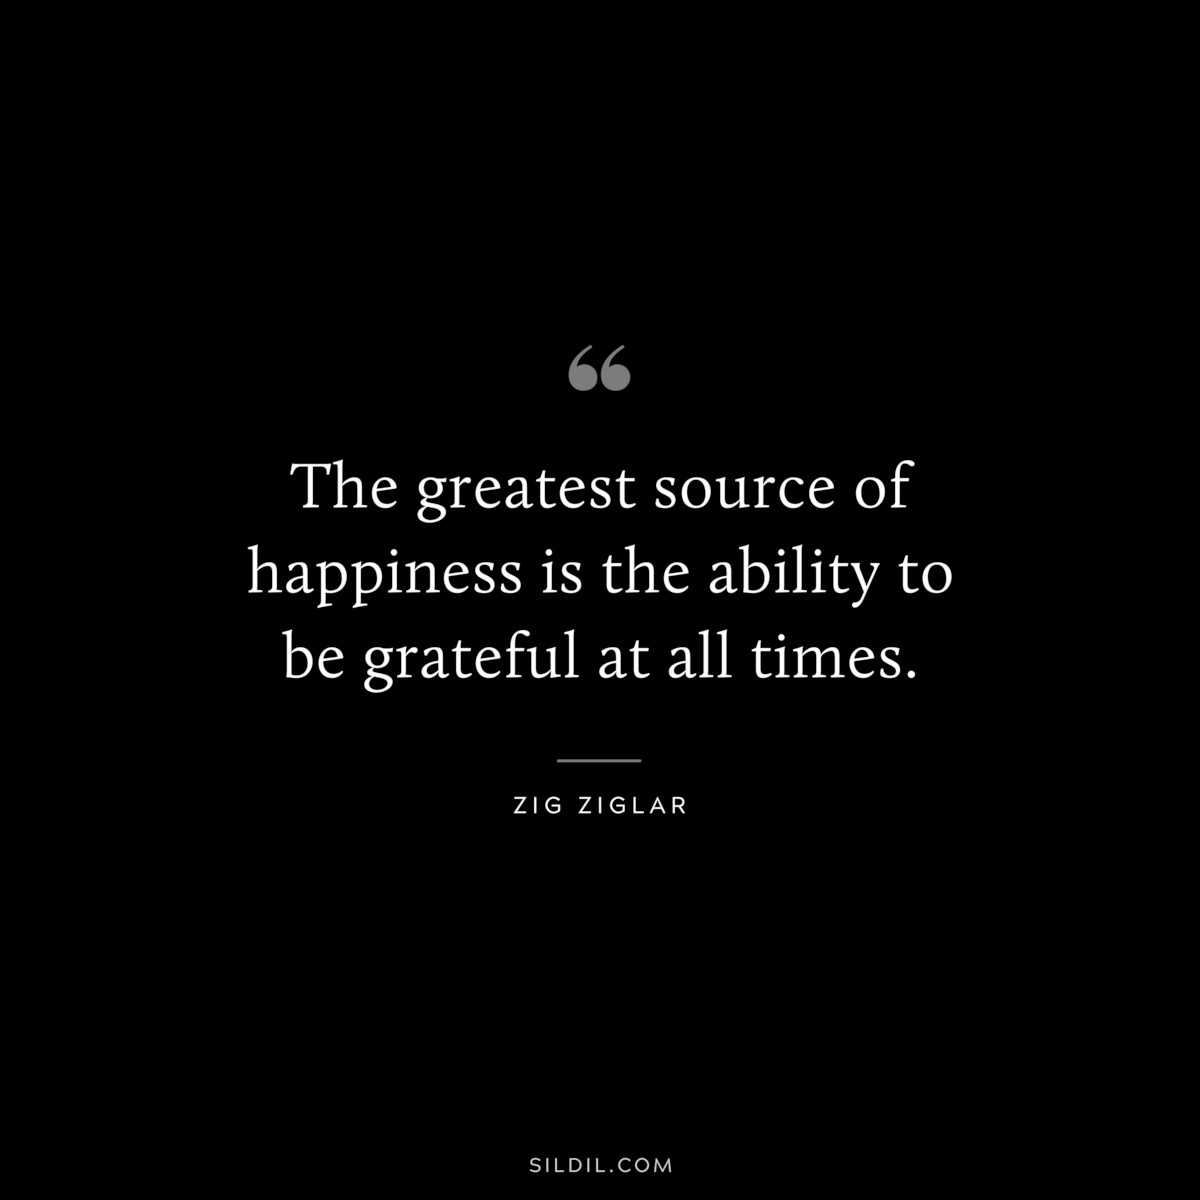 The greatest source of happiness is the ability to be grateful at all times. ― Zig Ziglar